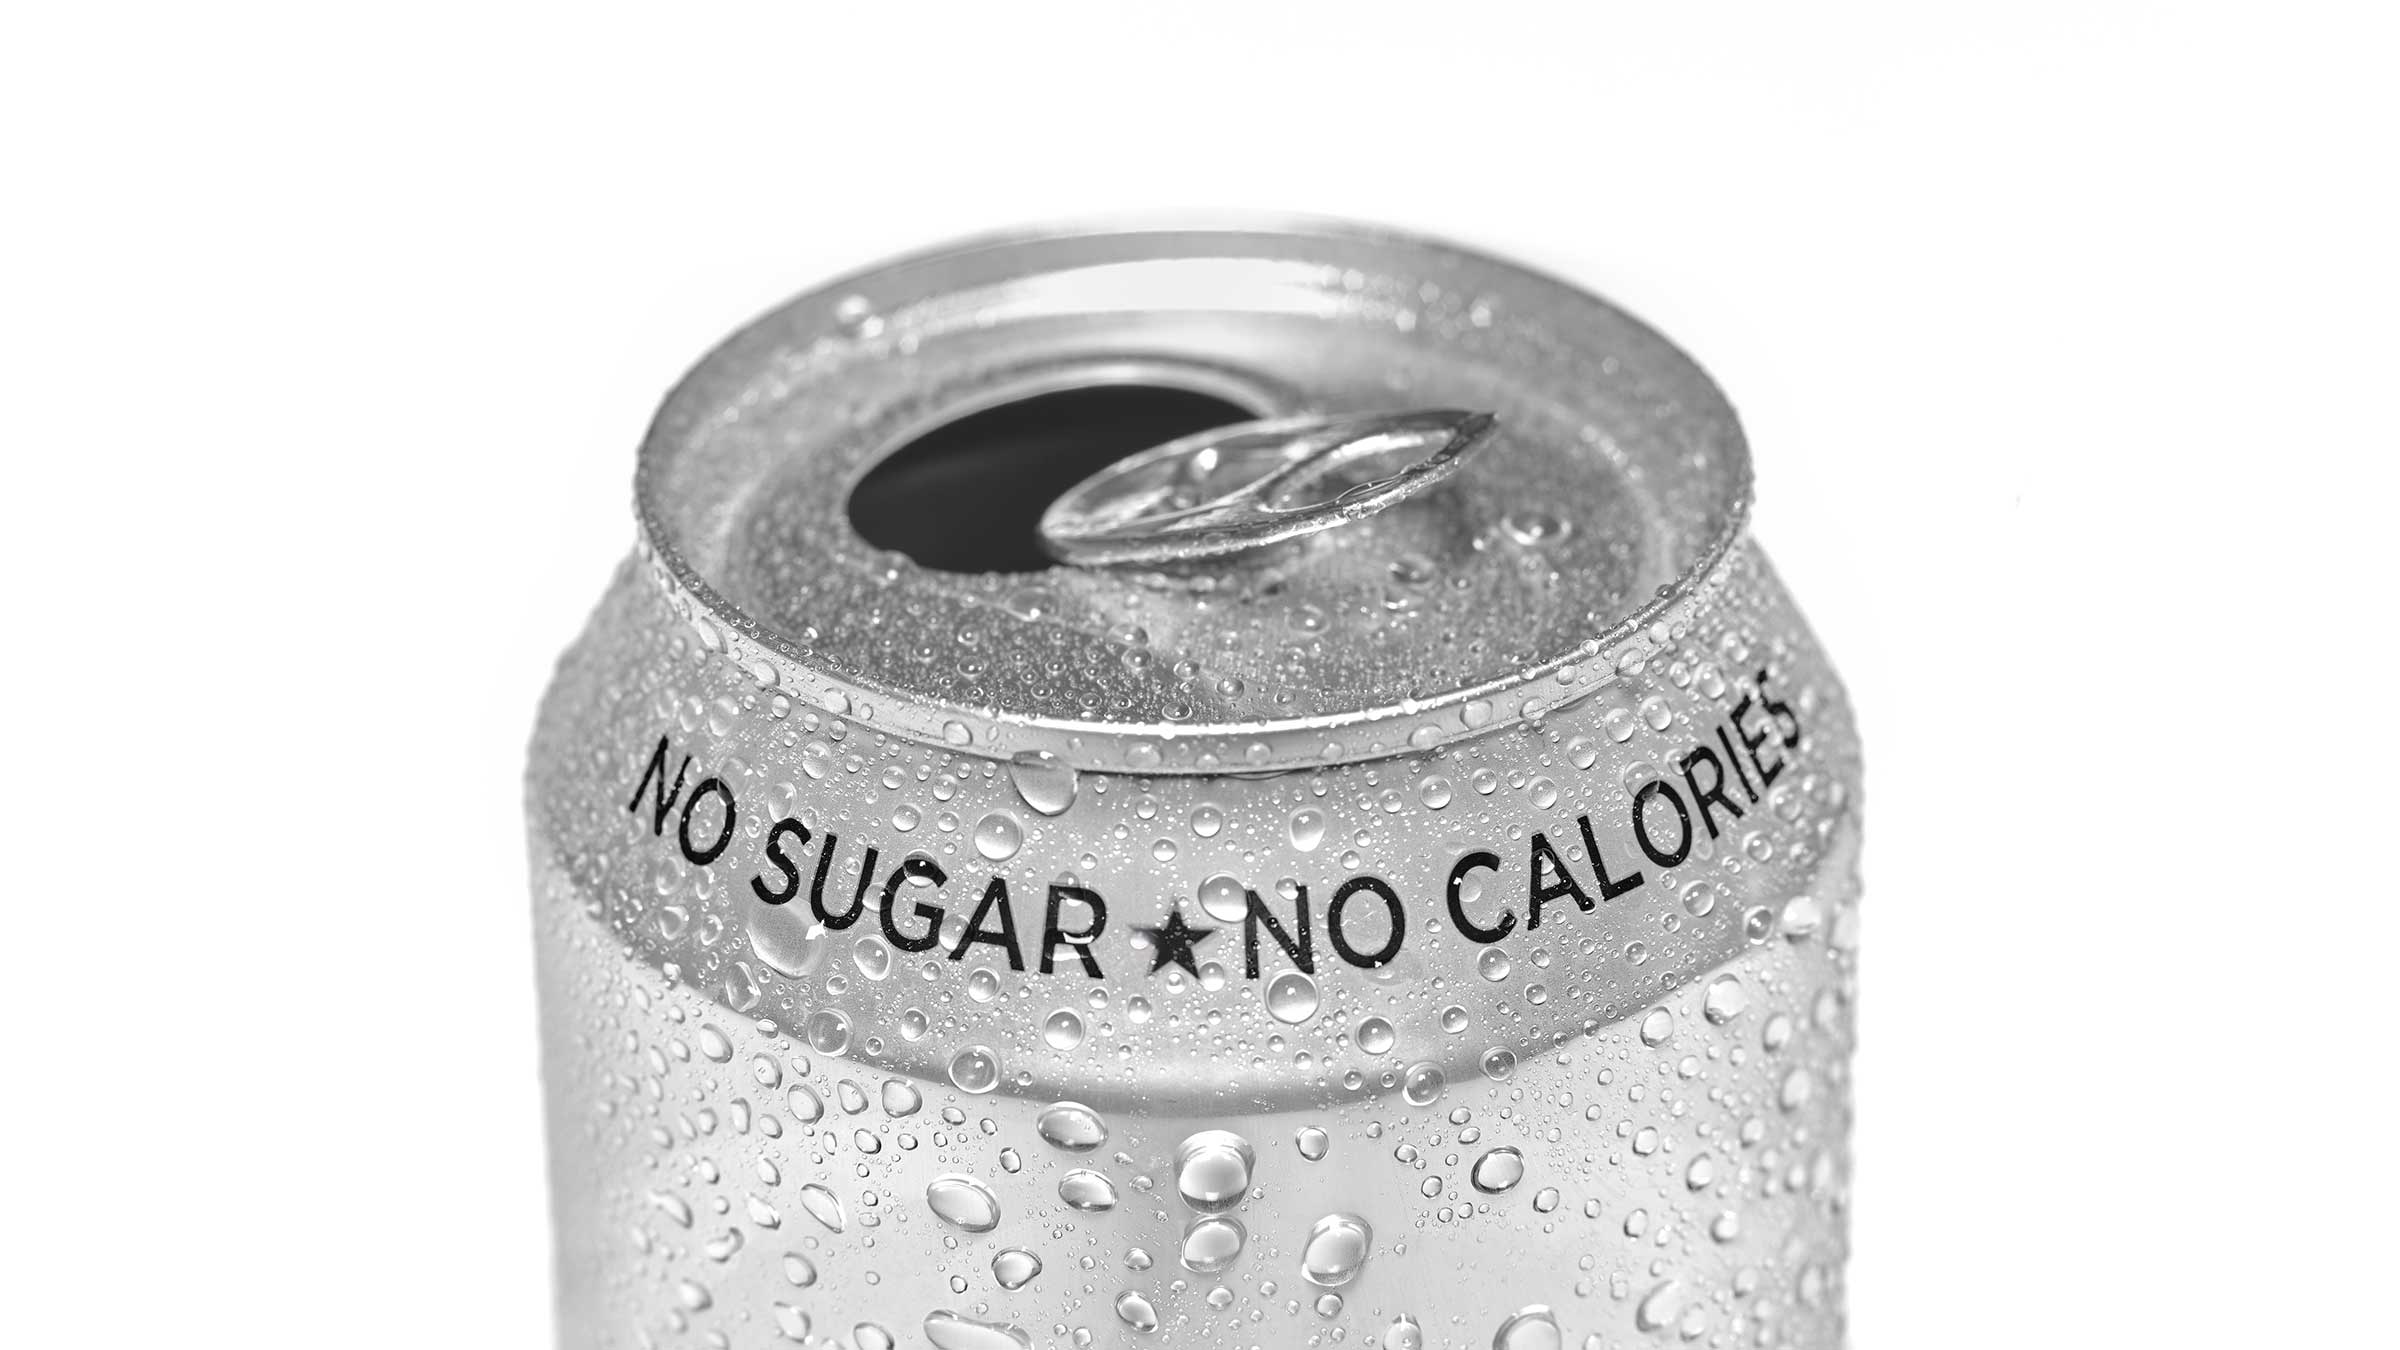 A can of diet soda